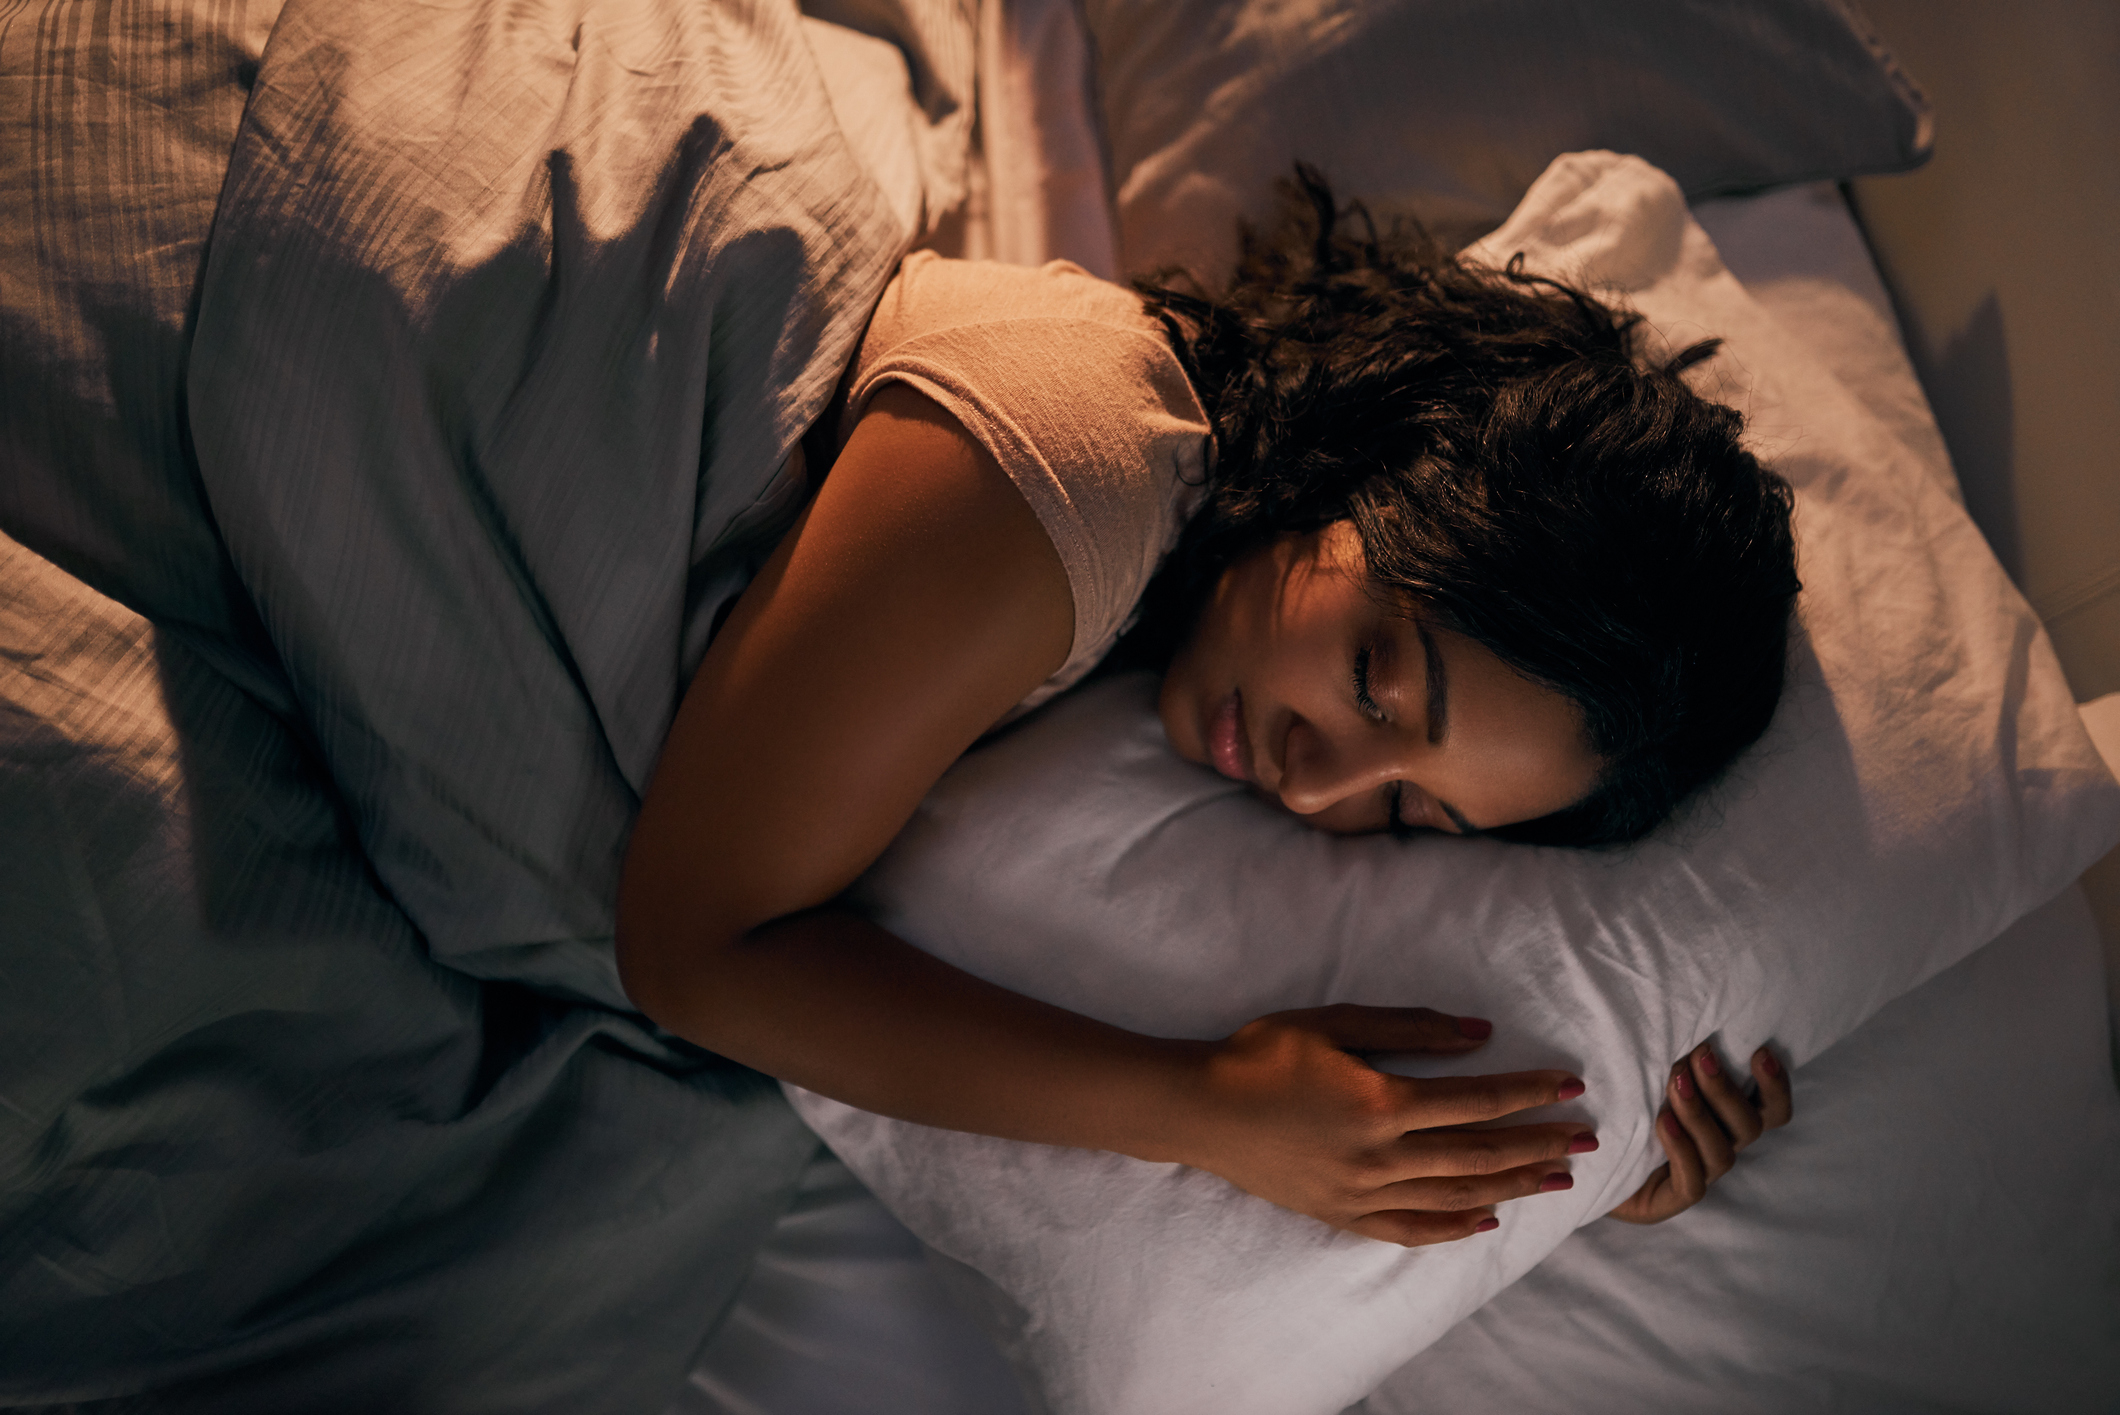 A person with dark hair sleeps peacefully on a bed, hugging a pillow and covered with a blanket